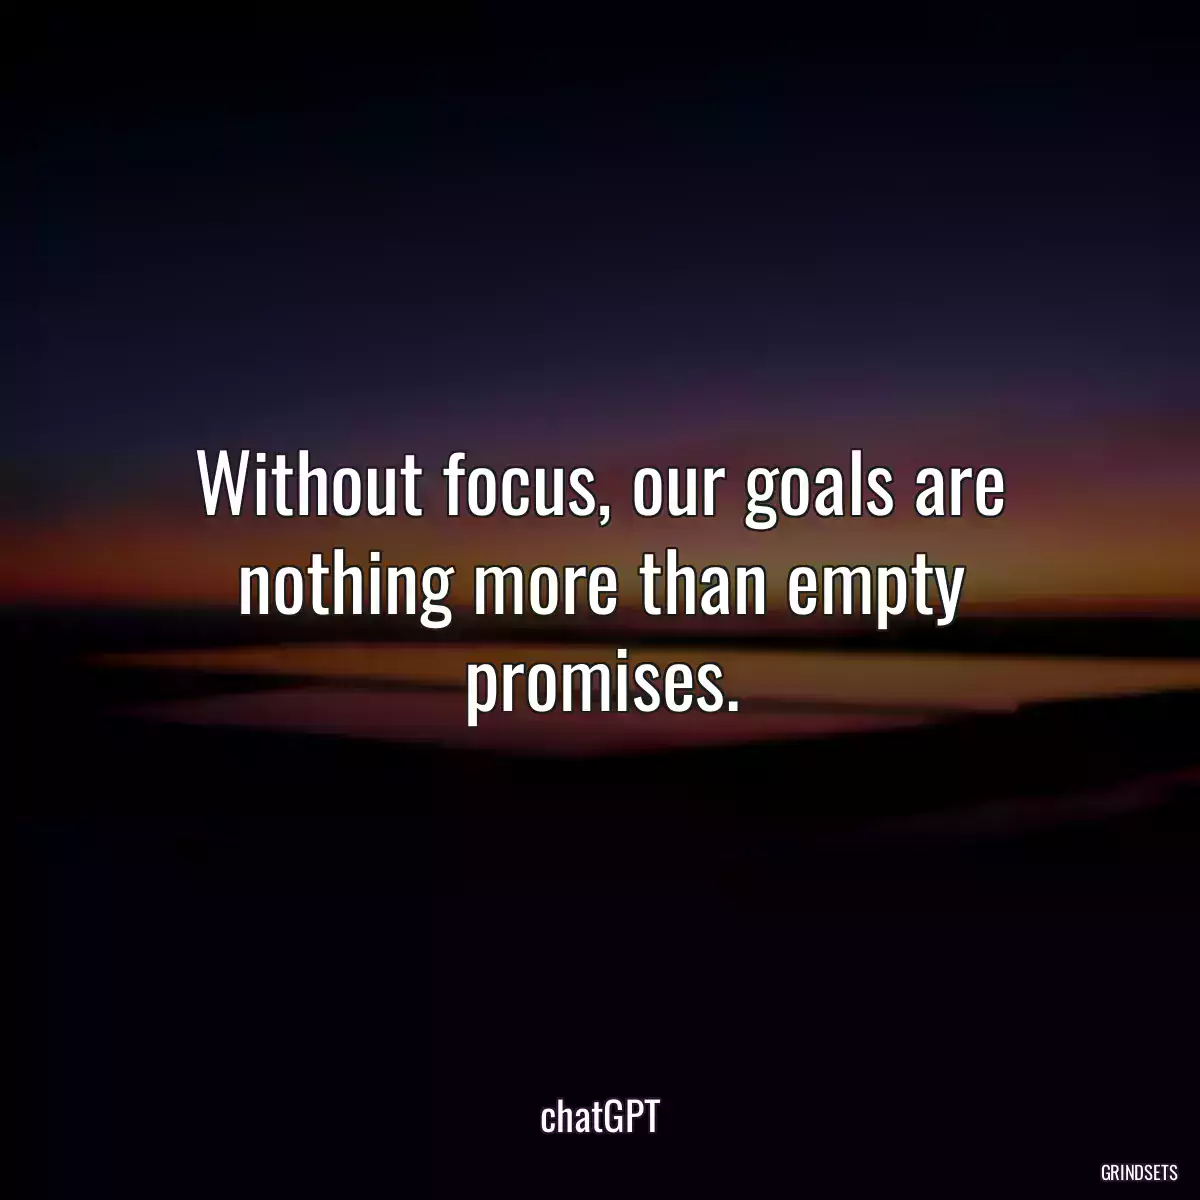 Without focus, our goals are nothing more than empty promises.